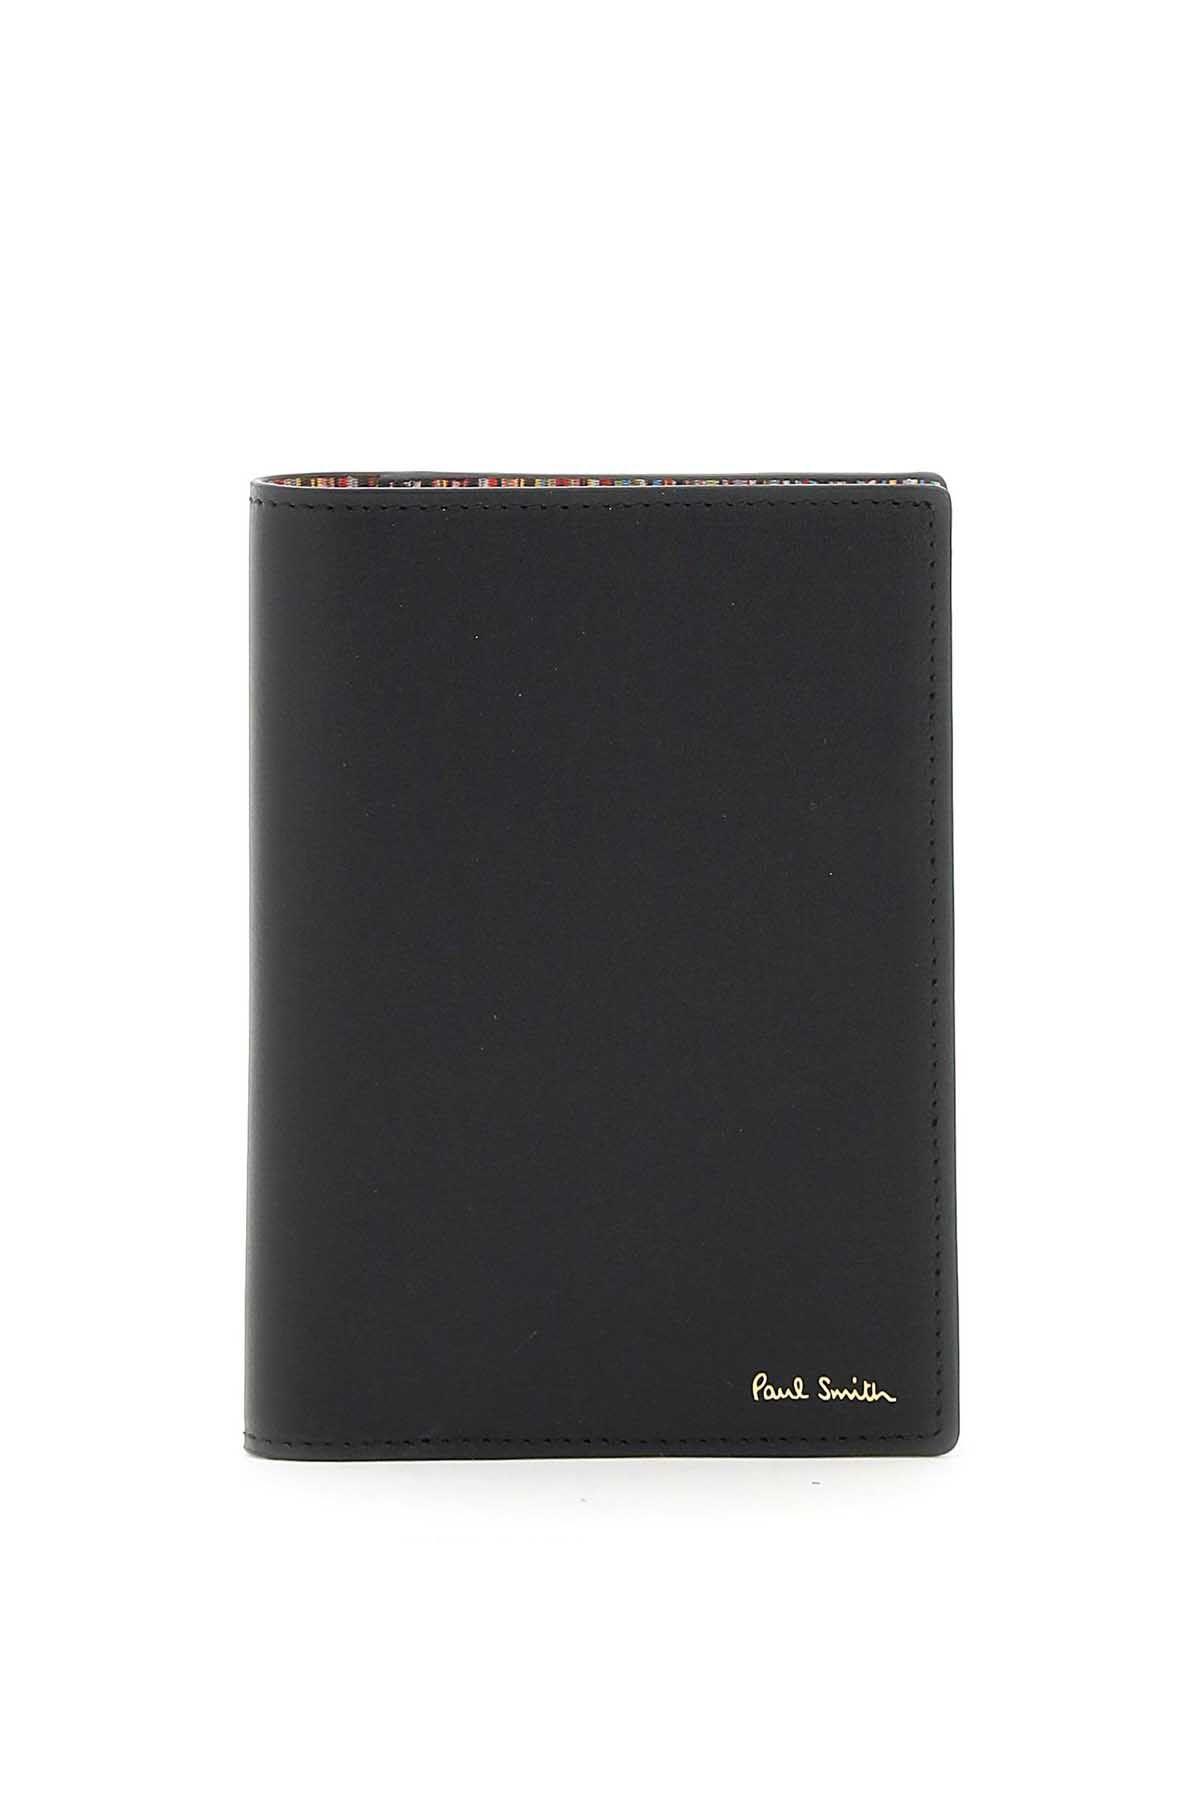 PAUL SMITH LEATHER PASSPORT COVER